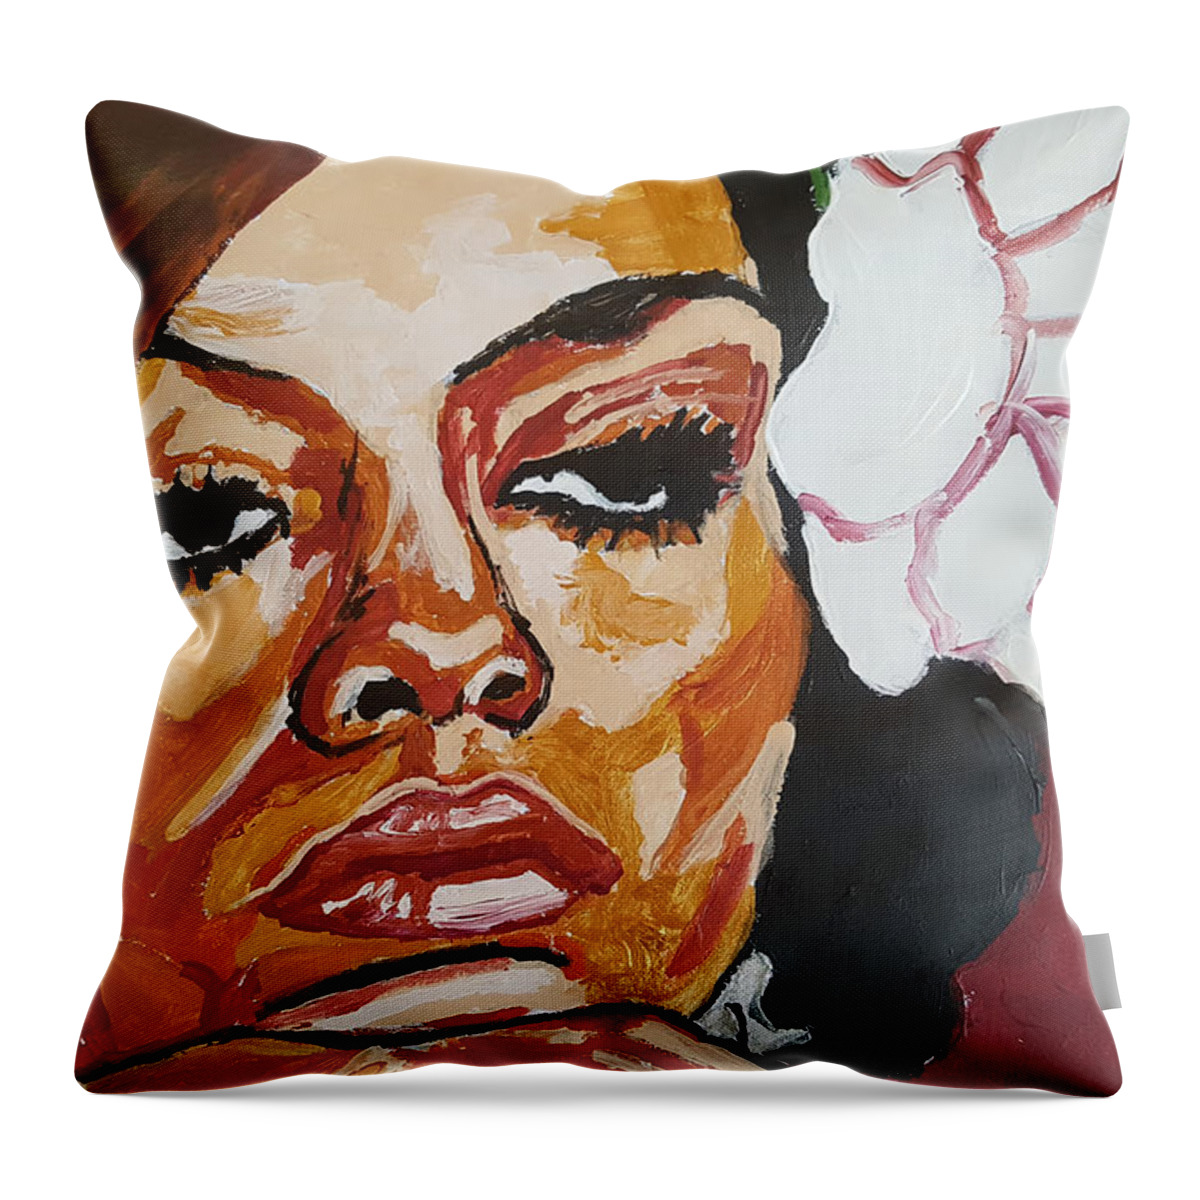 Diana Ross Throw Pillow featuring the painting Diana Ross by Rachel Natalie Rawlins